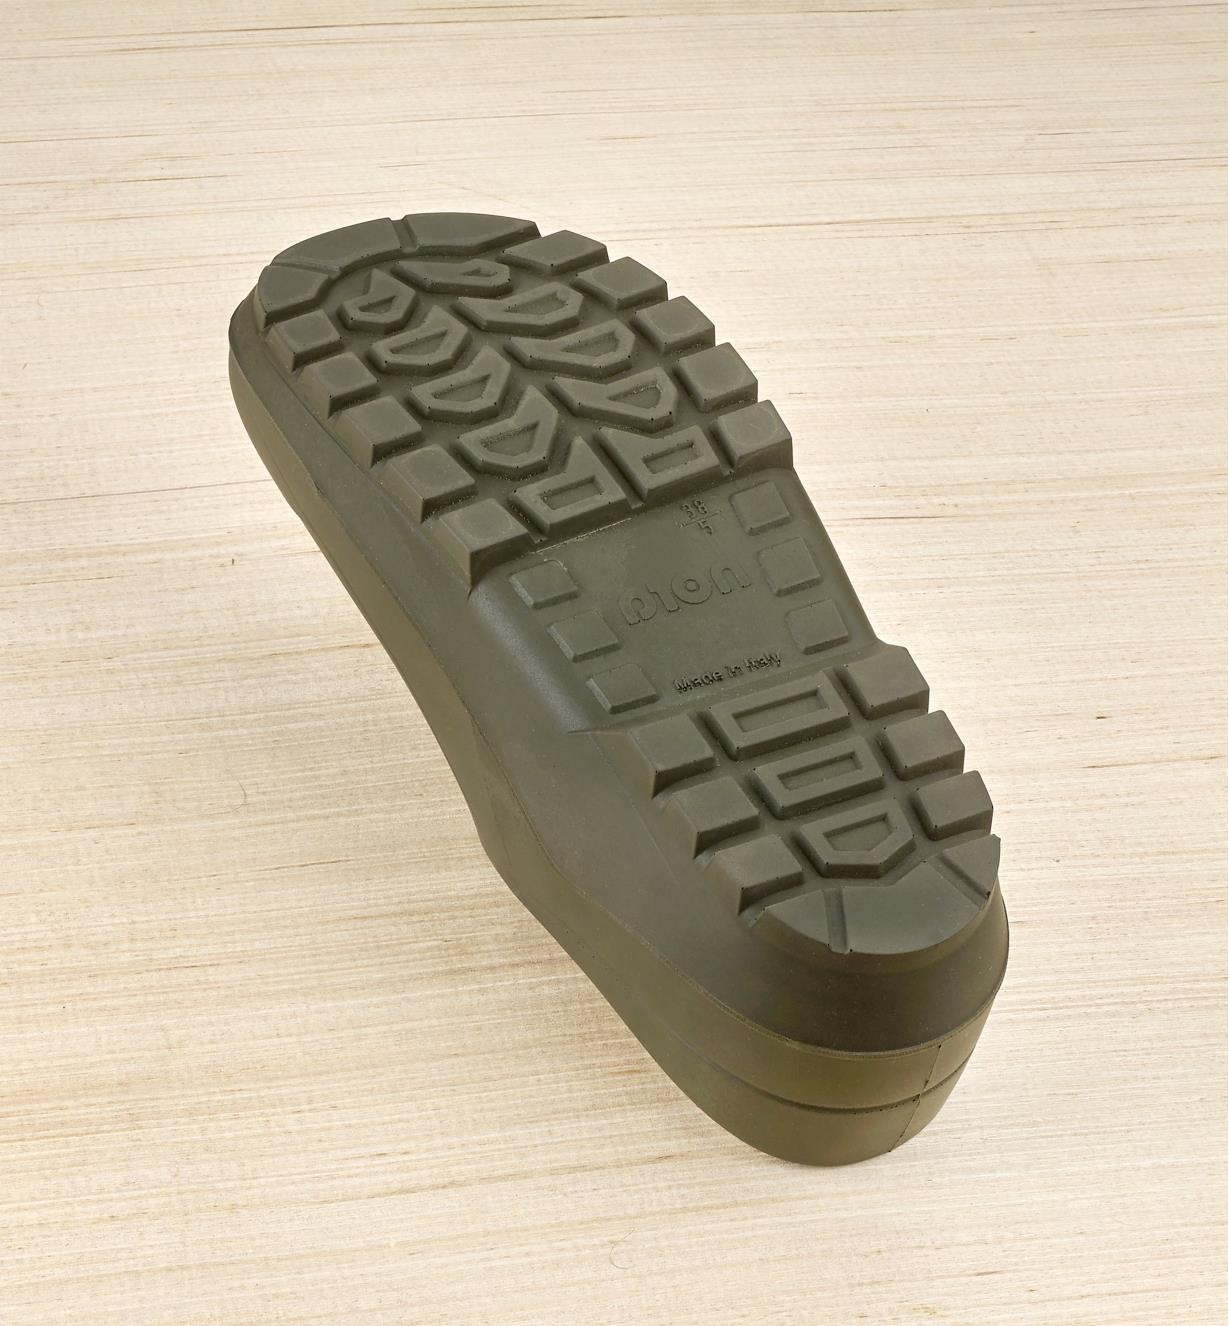 A bottom view of a European garden clog showing the widely spaced treads